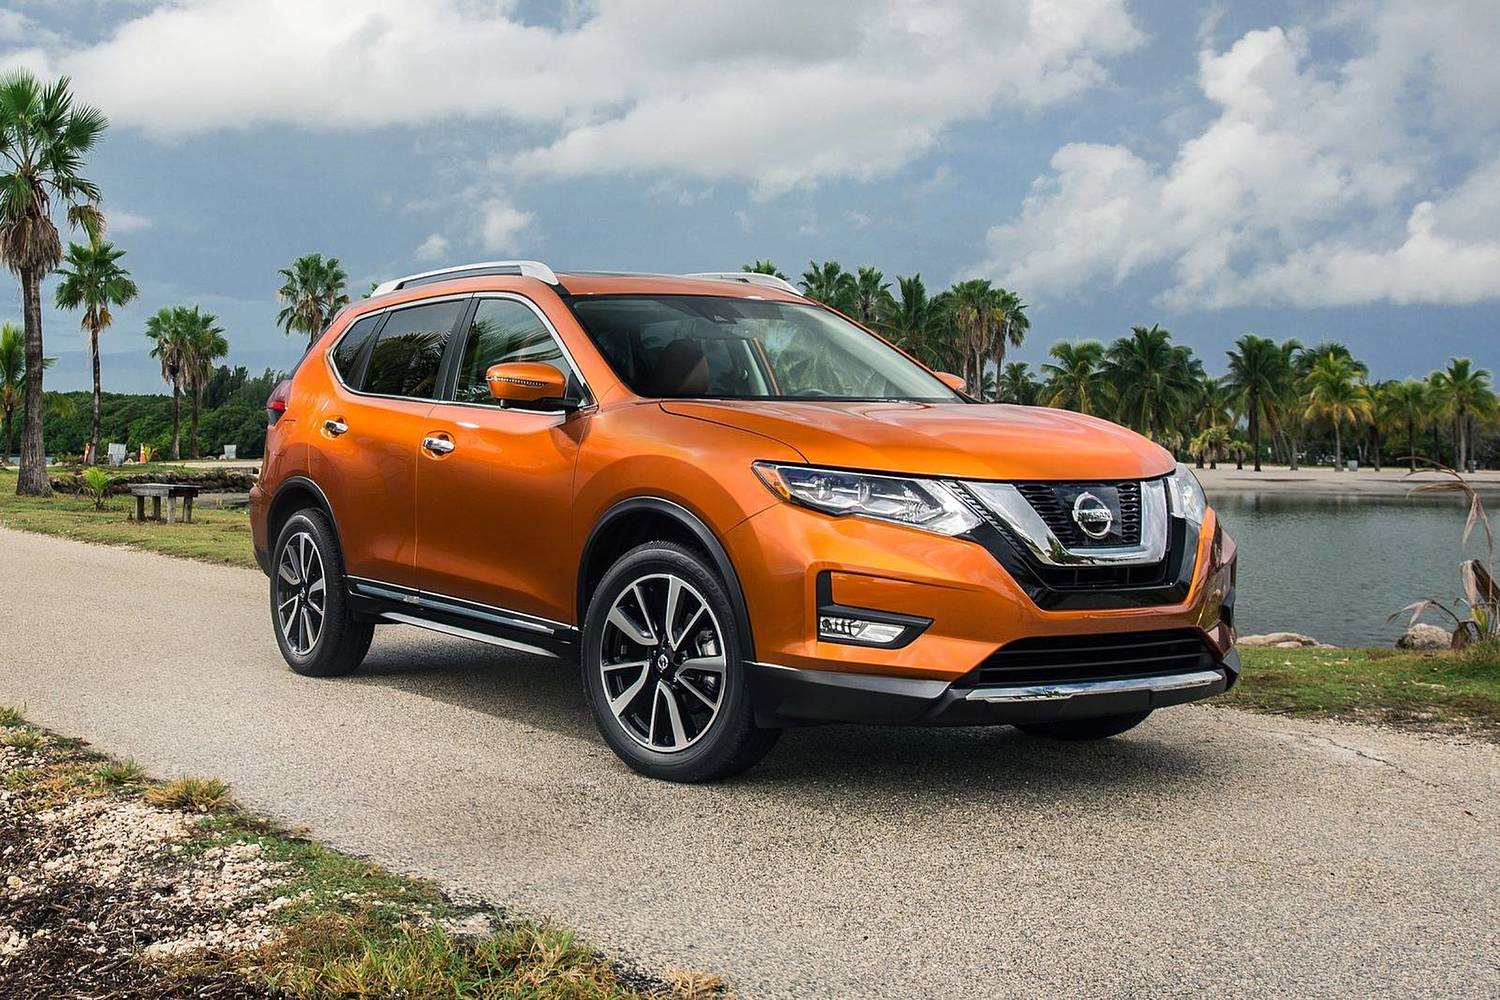 Nissan Rogue SL 4dr SUV Exterior. Platinum Package Shown. (2017 model year shown)